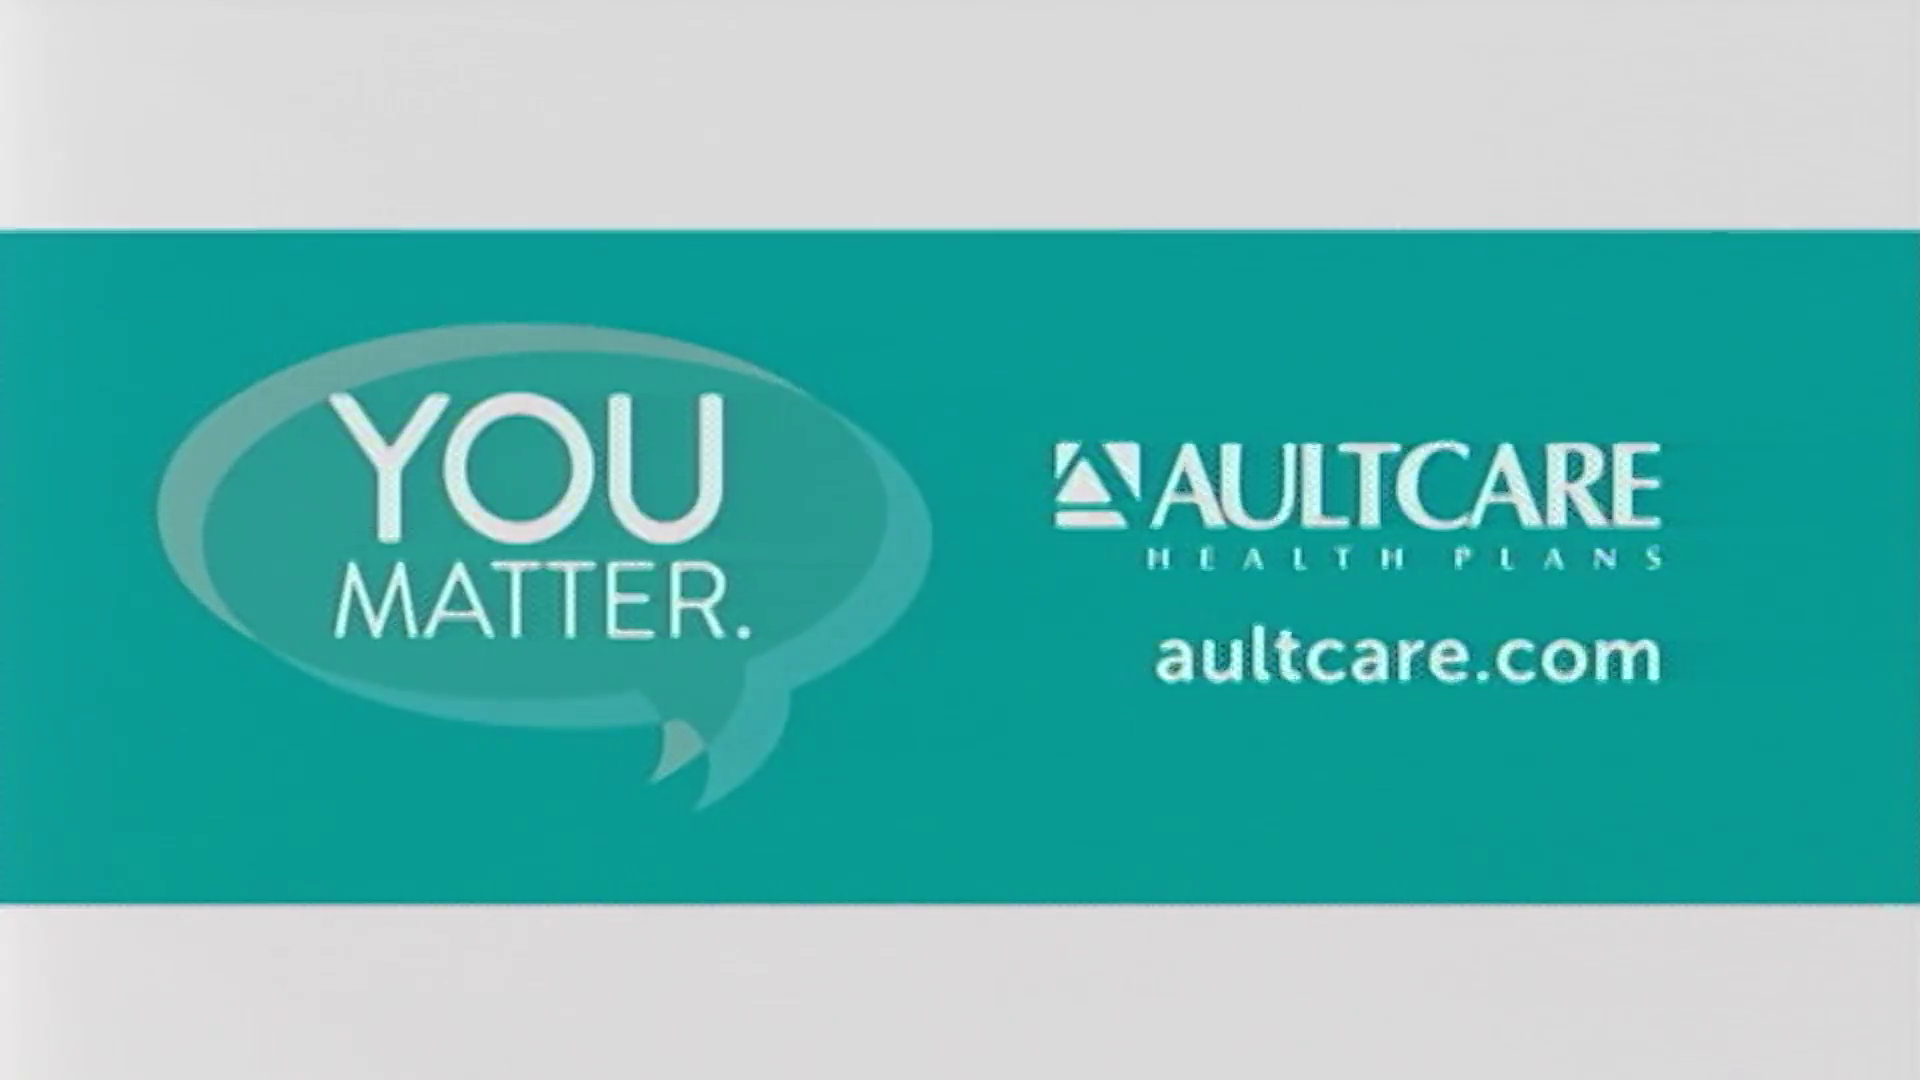 Aultcare 30 Second Commercial